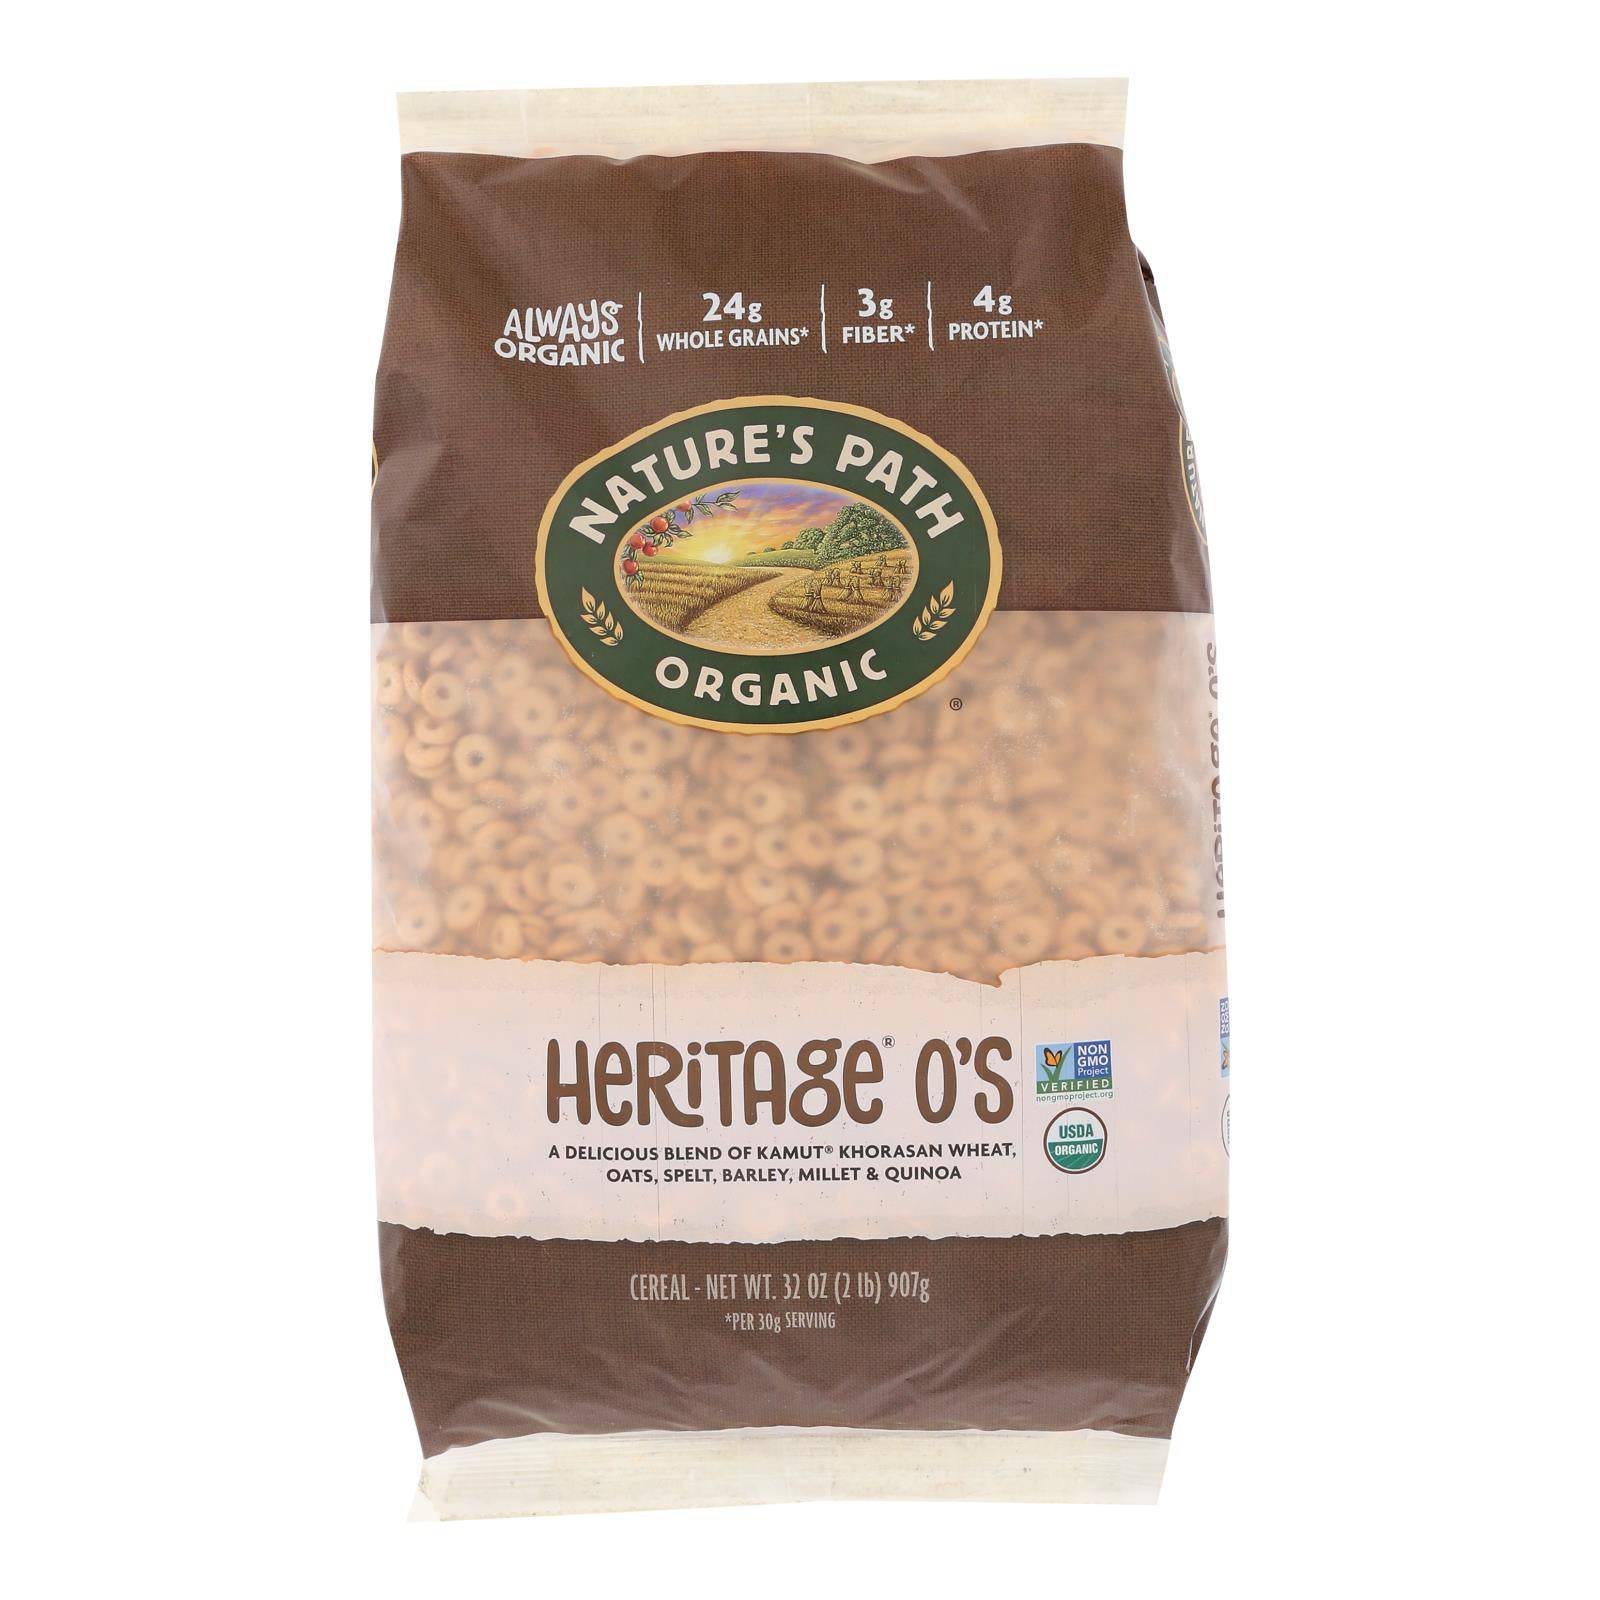 Buy Nature's Path Organic Heritage O's Cereal - Case Of 6 - 32 Oz.  at OnlyNaturals.us